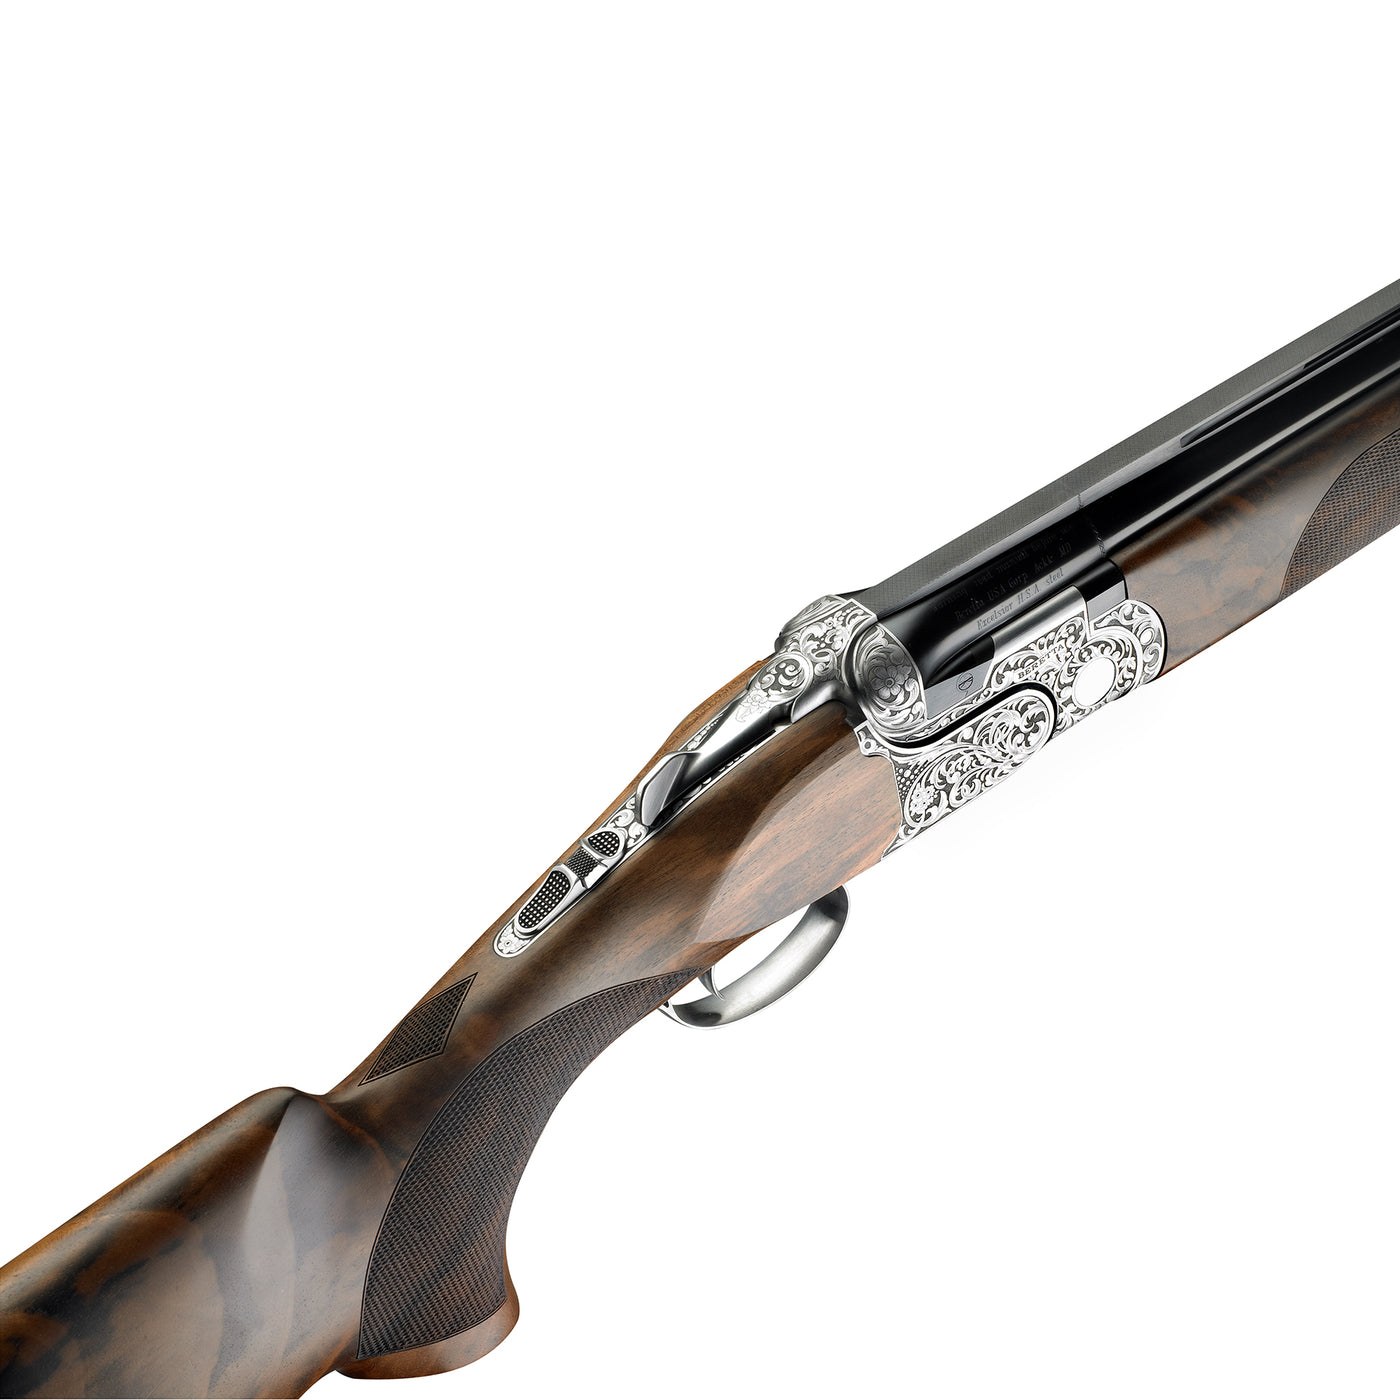 Beretta dt11 l over and under shotgun for hunting